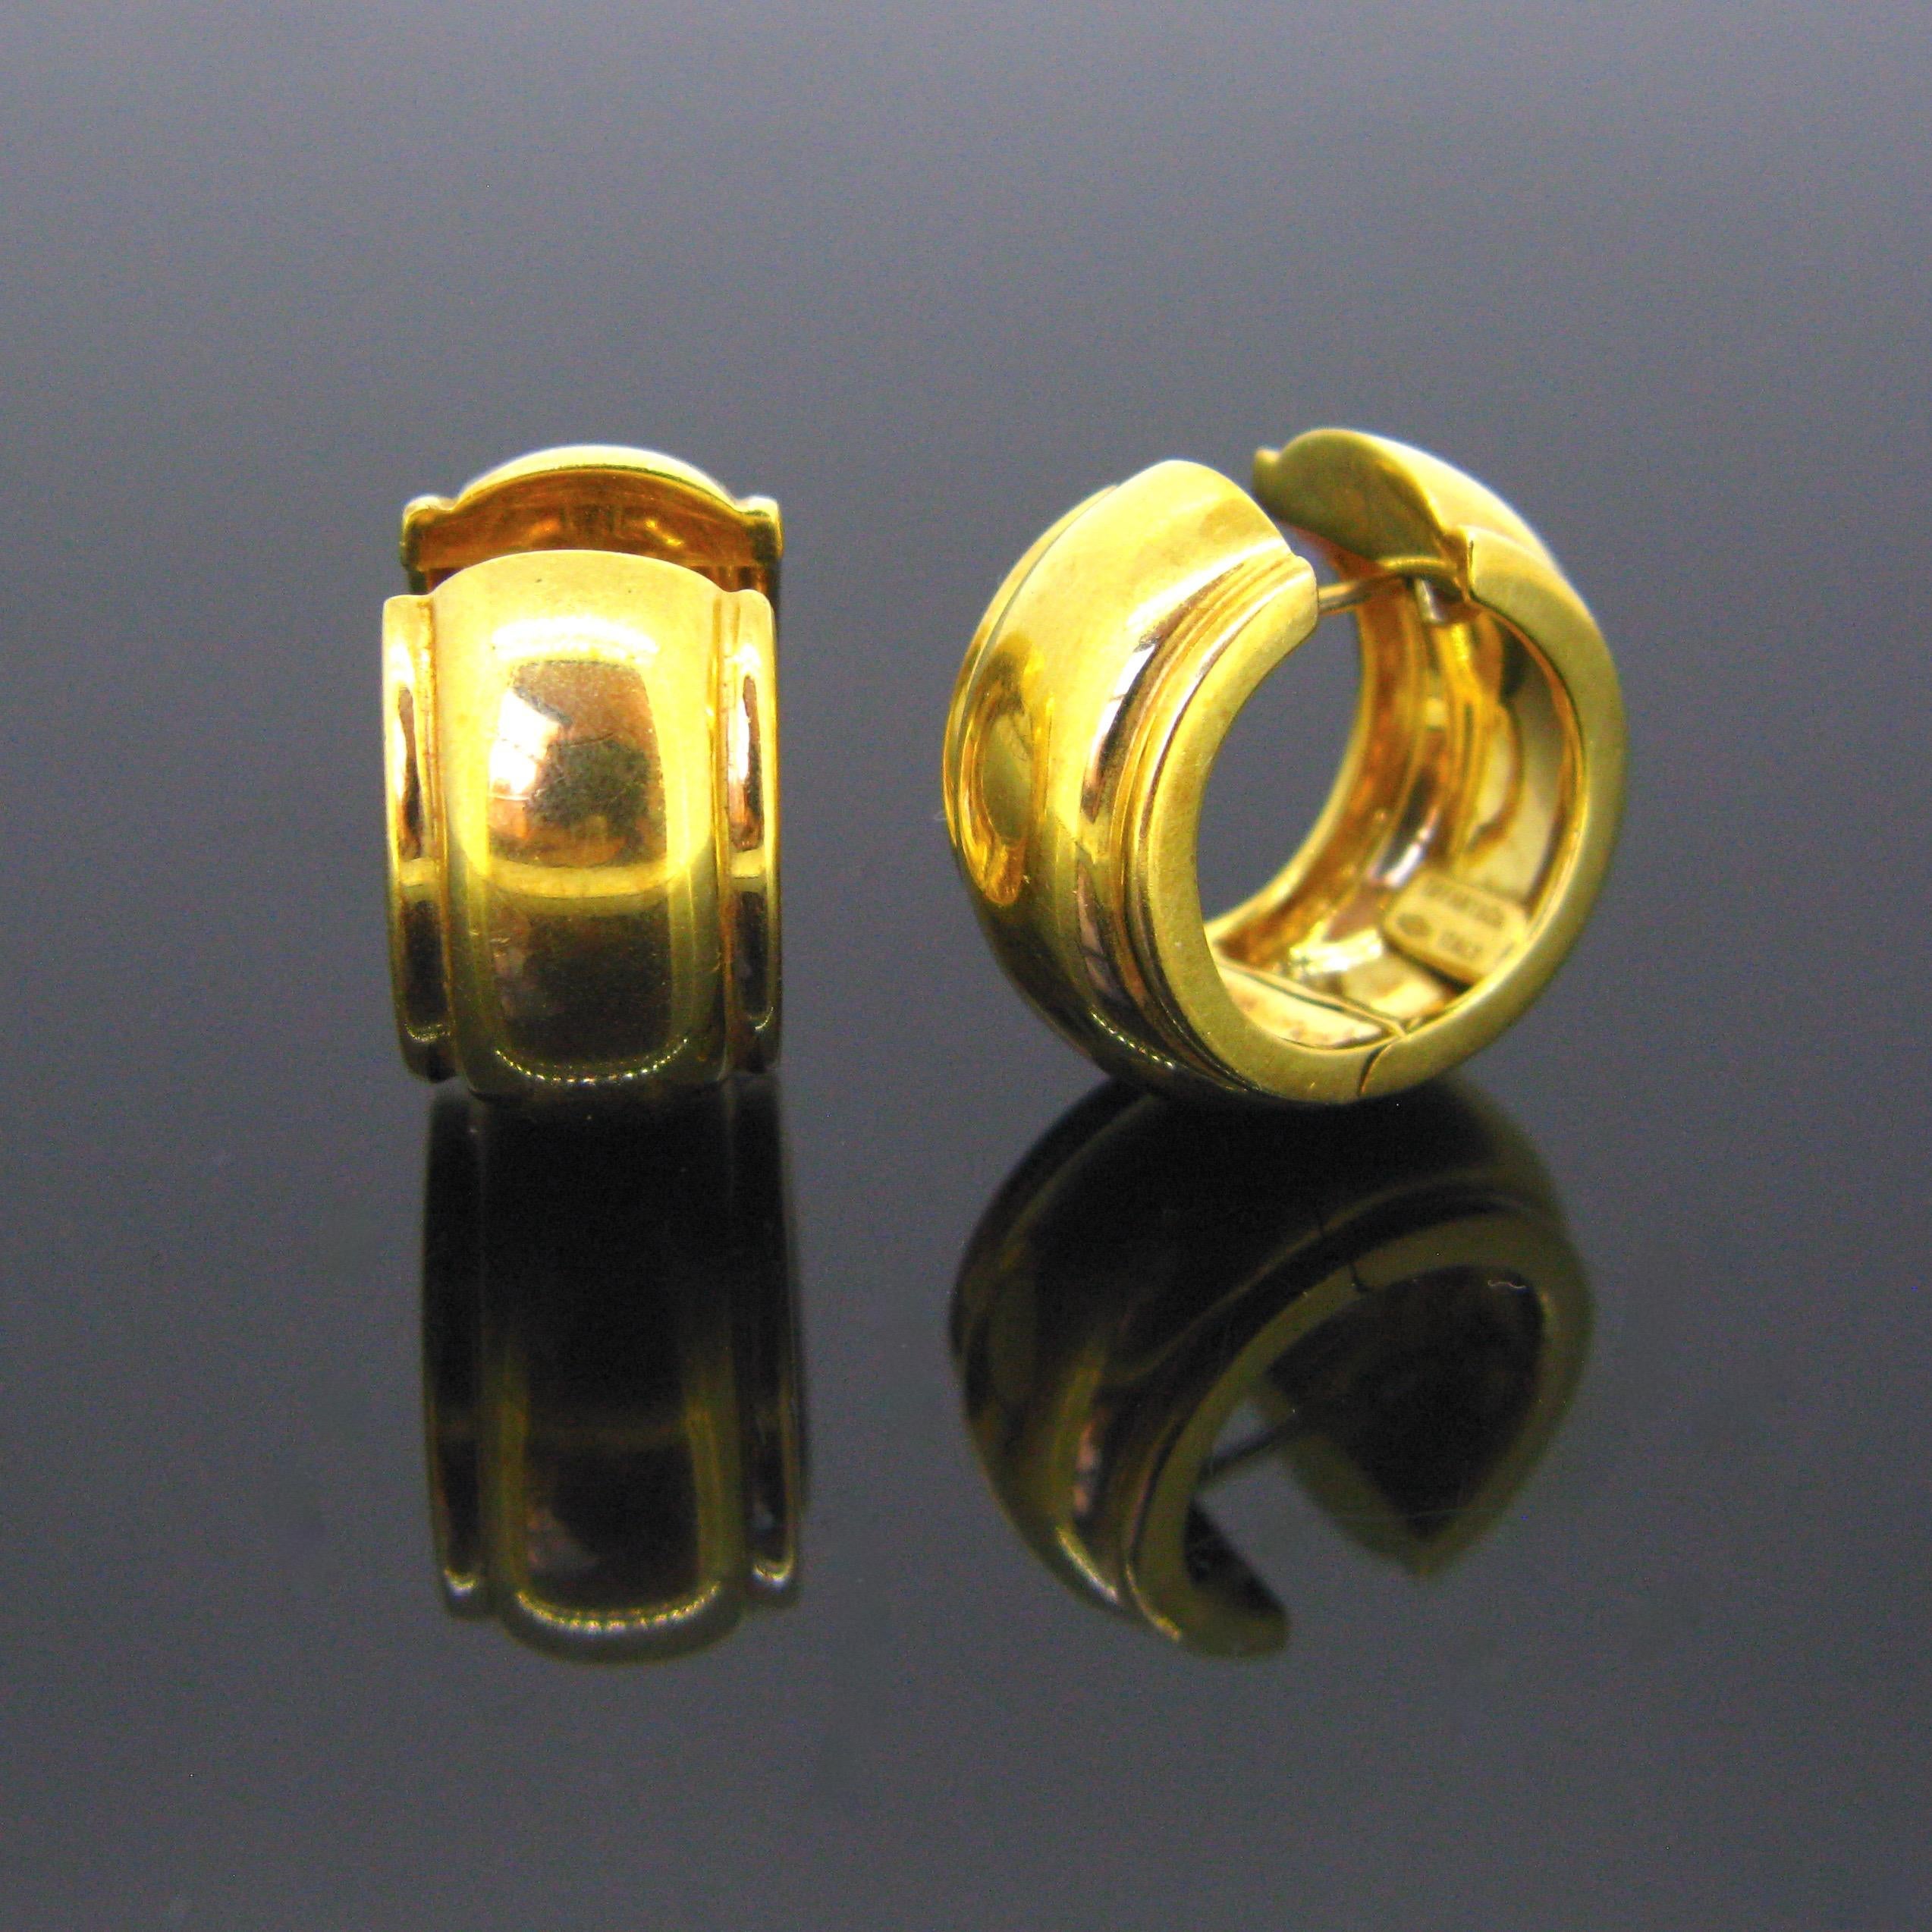 A timeless pair of creoles by Tiffany. These are bold and shiny. They are made in 18kt yellow gold. The barrels are in plain gold and presents very few traces of wear. They close firmly with a snap. The signature Tiffany&Co is engraved inside the